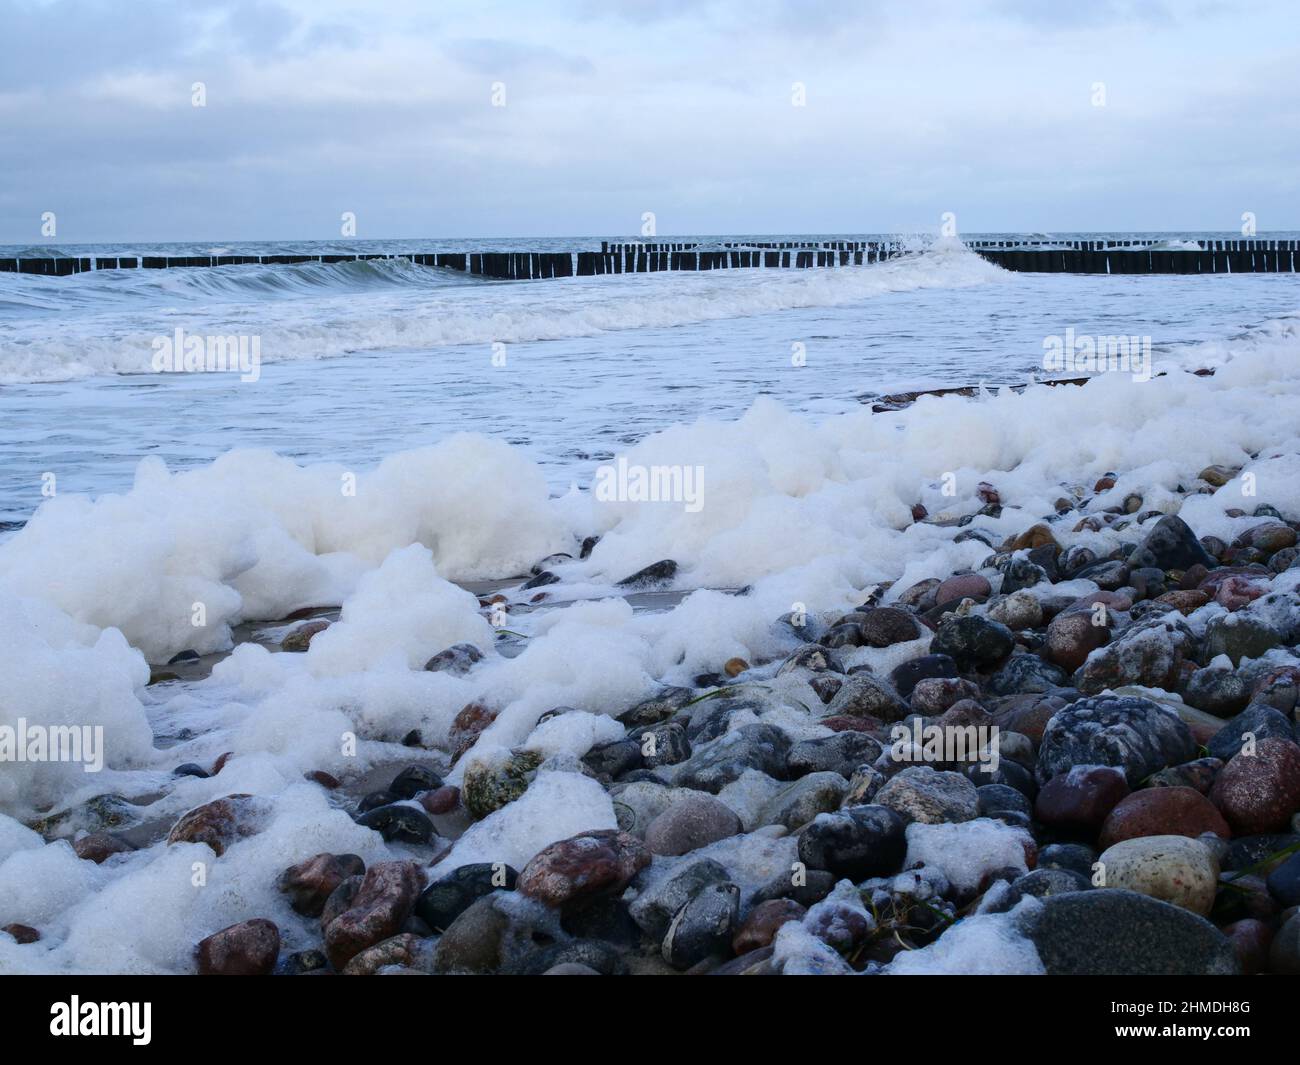 06 February 2022, Mecklenburg-Western Pomerania, Prerow: 06.02.2022, Wustrow on the Darß. Foam piles up on a stormy day on the beach of the Baltic Sea in Wustrow. The foam is considered non-toxic and harmless to humans - it consists of algae remains and small air bubbles. Photo: Wolfram Steinberg/dpa Photo: Wolfram Steinberg/dpa Stock Photo